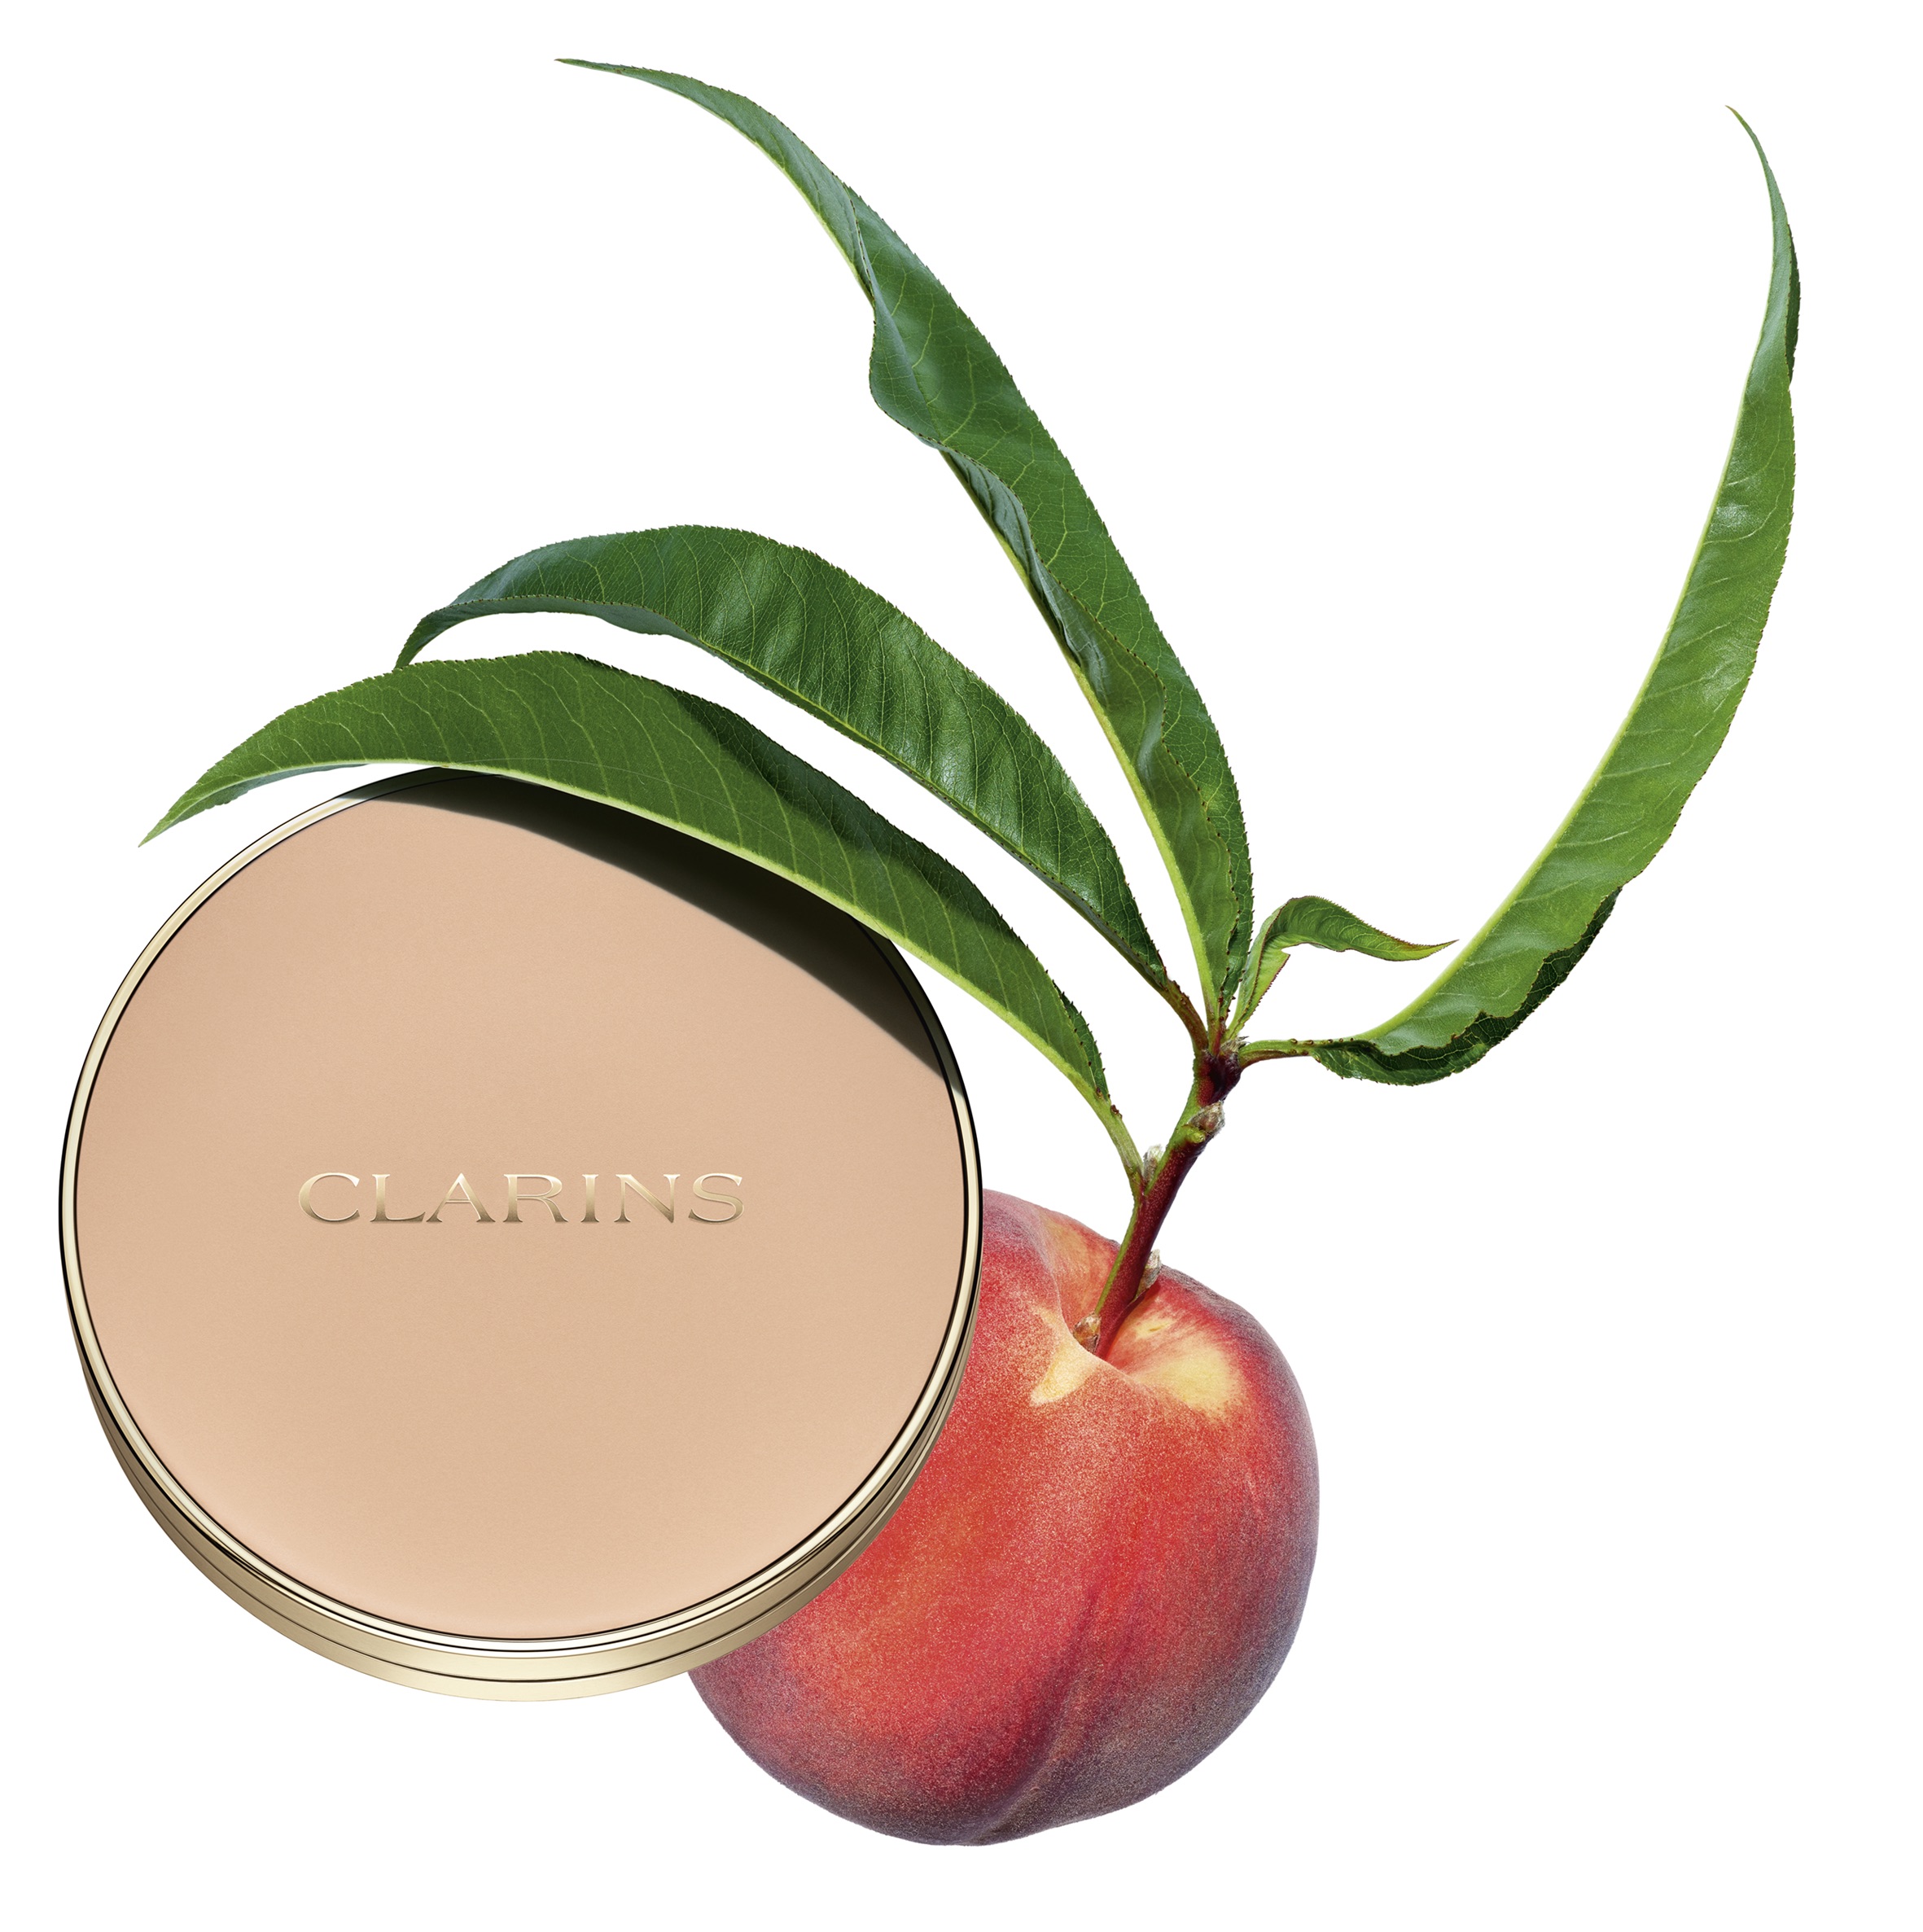 Clarins poudre make-up